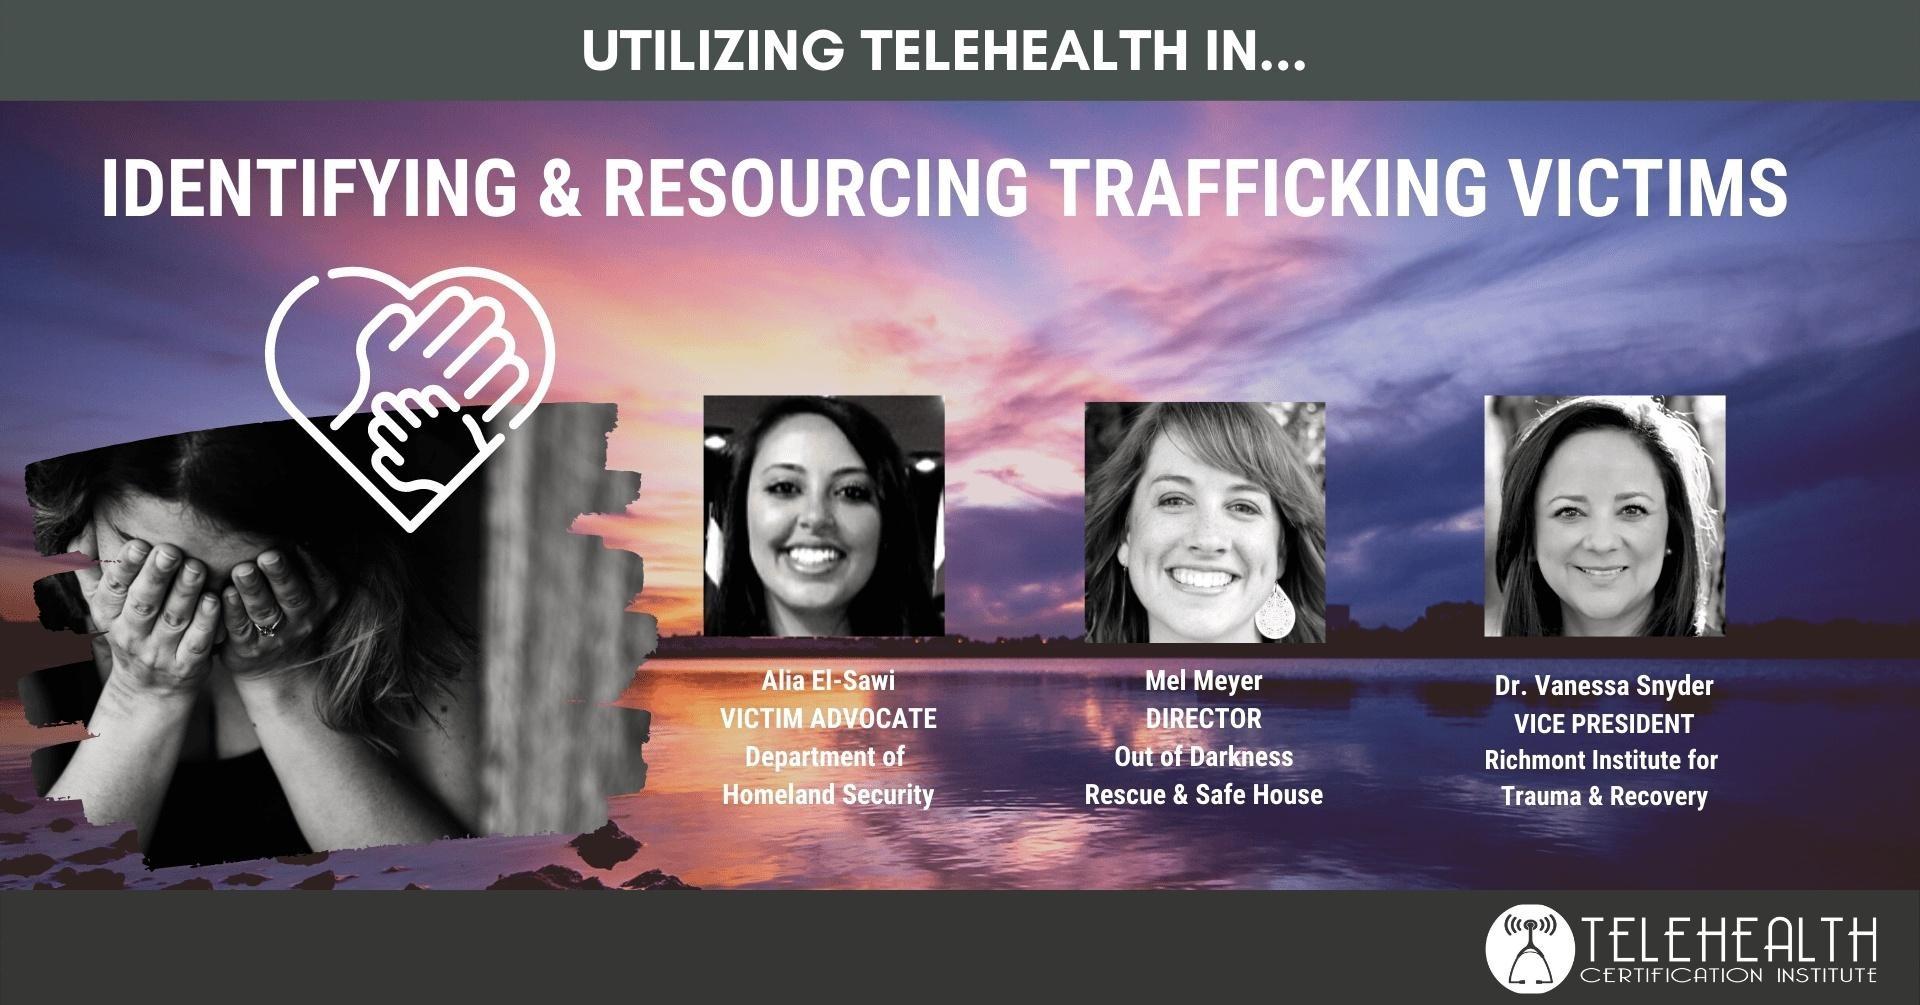 Telehealth Event Assists Clinicians in Identifying & Resourcing Trafficking Victims